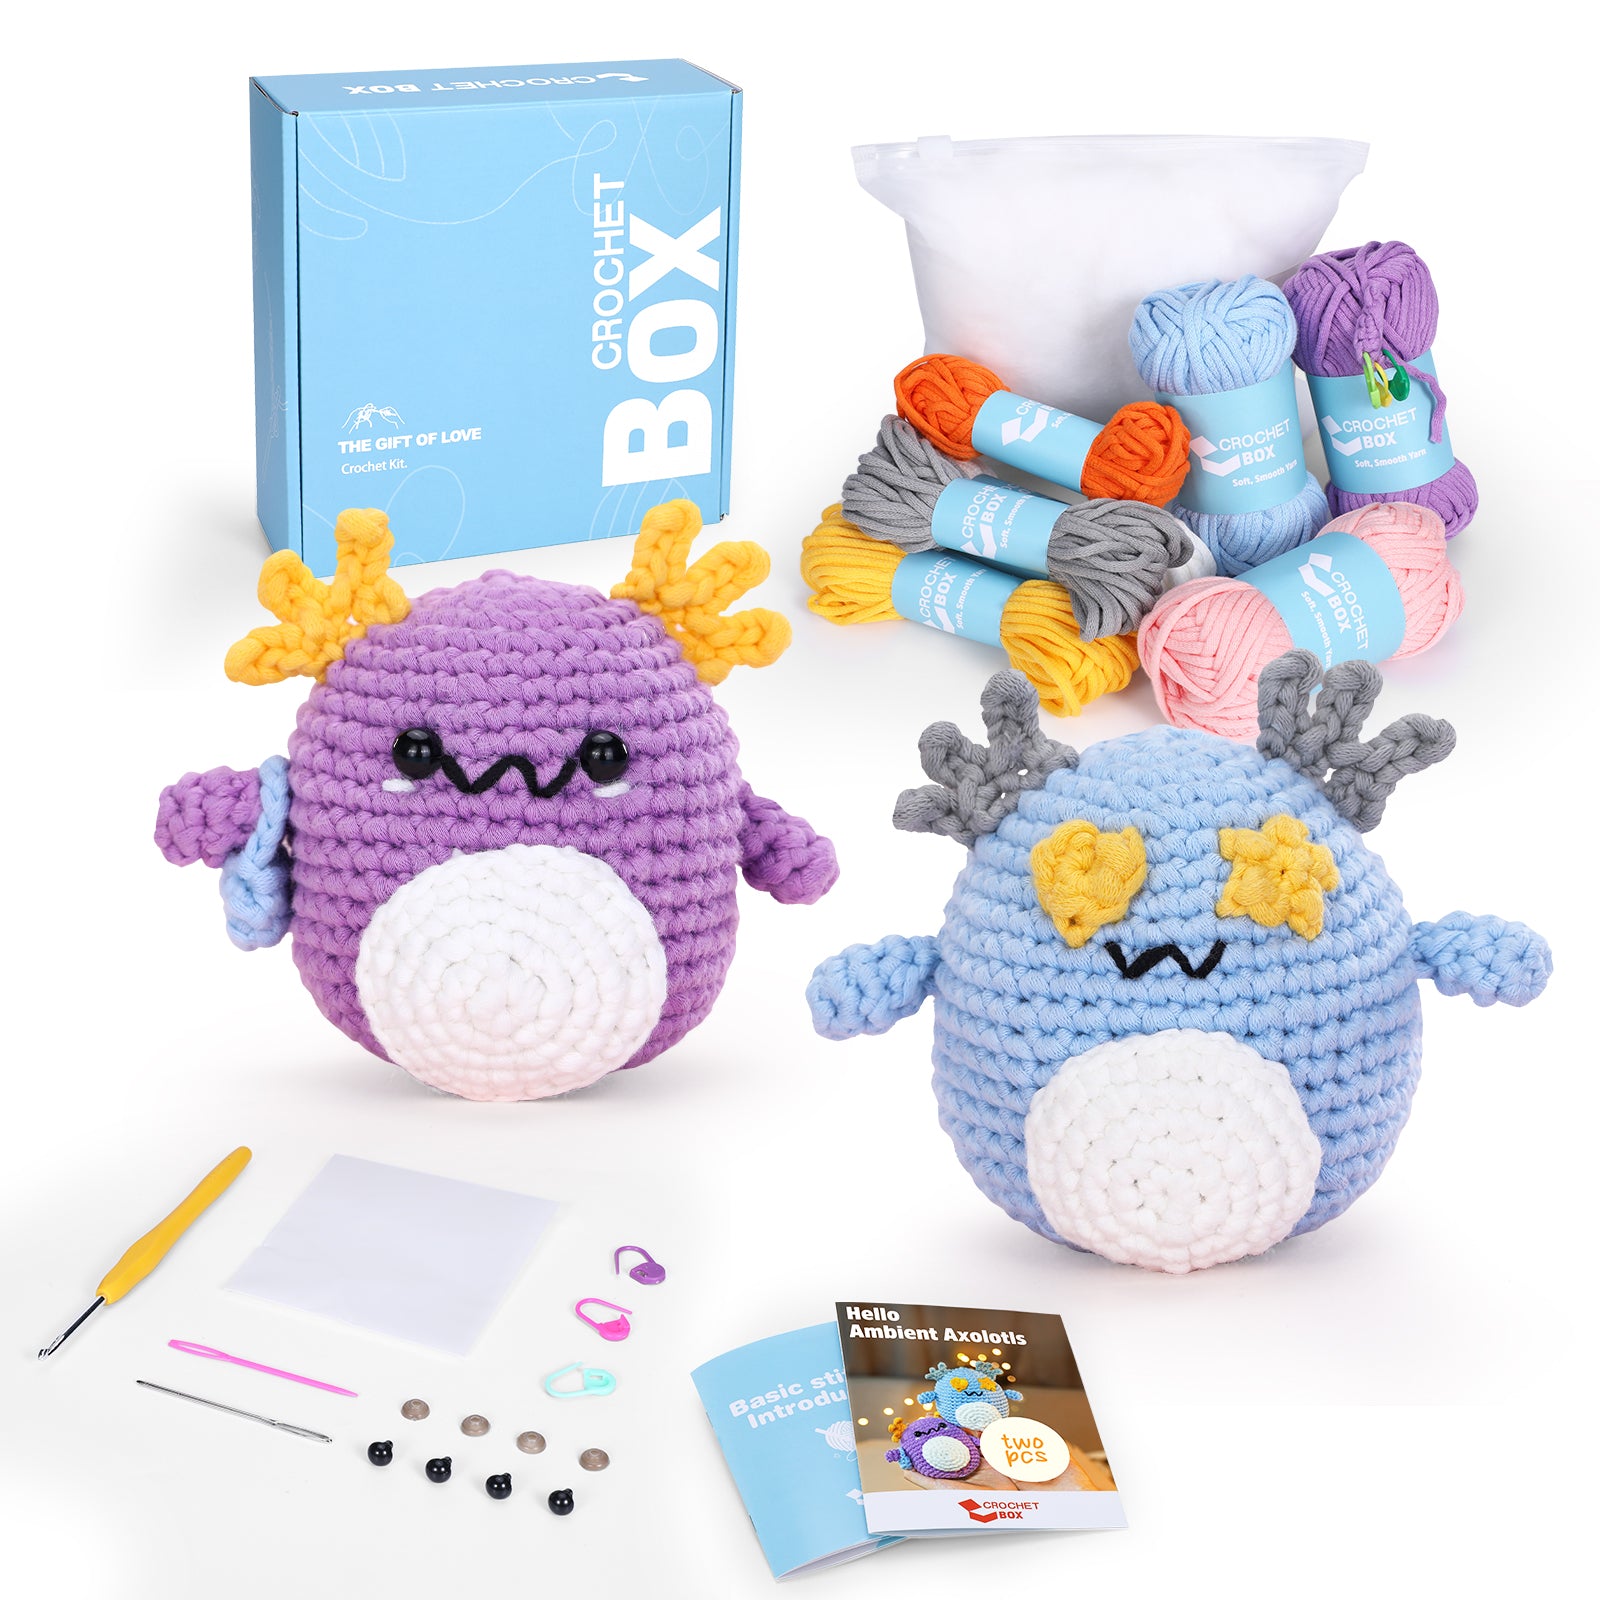 Crochet Kit for Be Axolotl Crochet Kit, Create Your First Amigurumi, Include Hook, Soft Yarn, and Accessories, Starter DIY Crafts for Adults, Teens